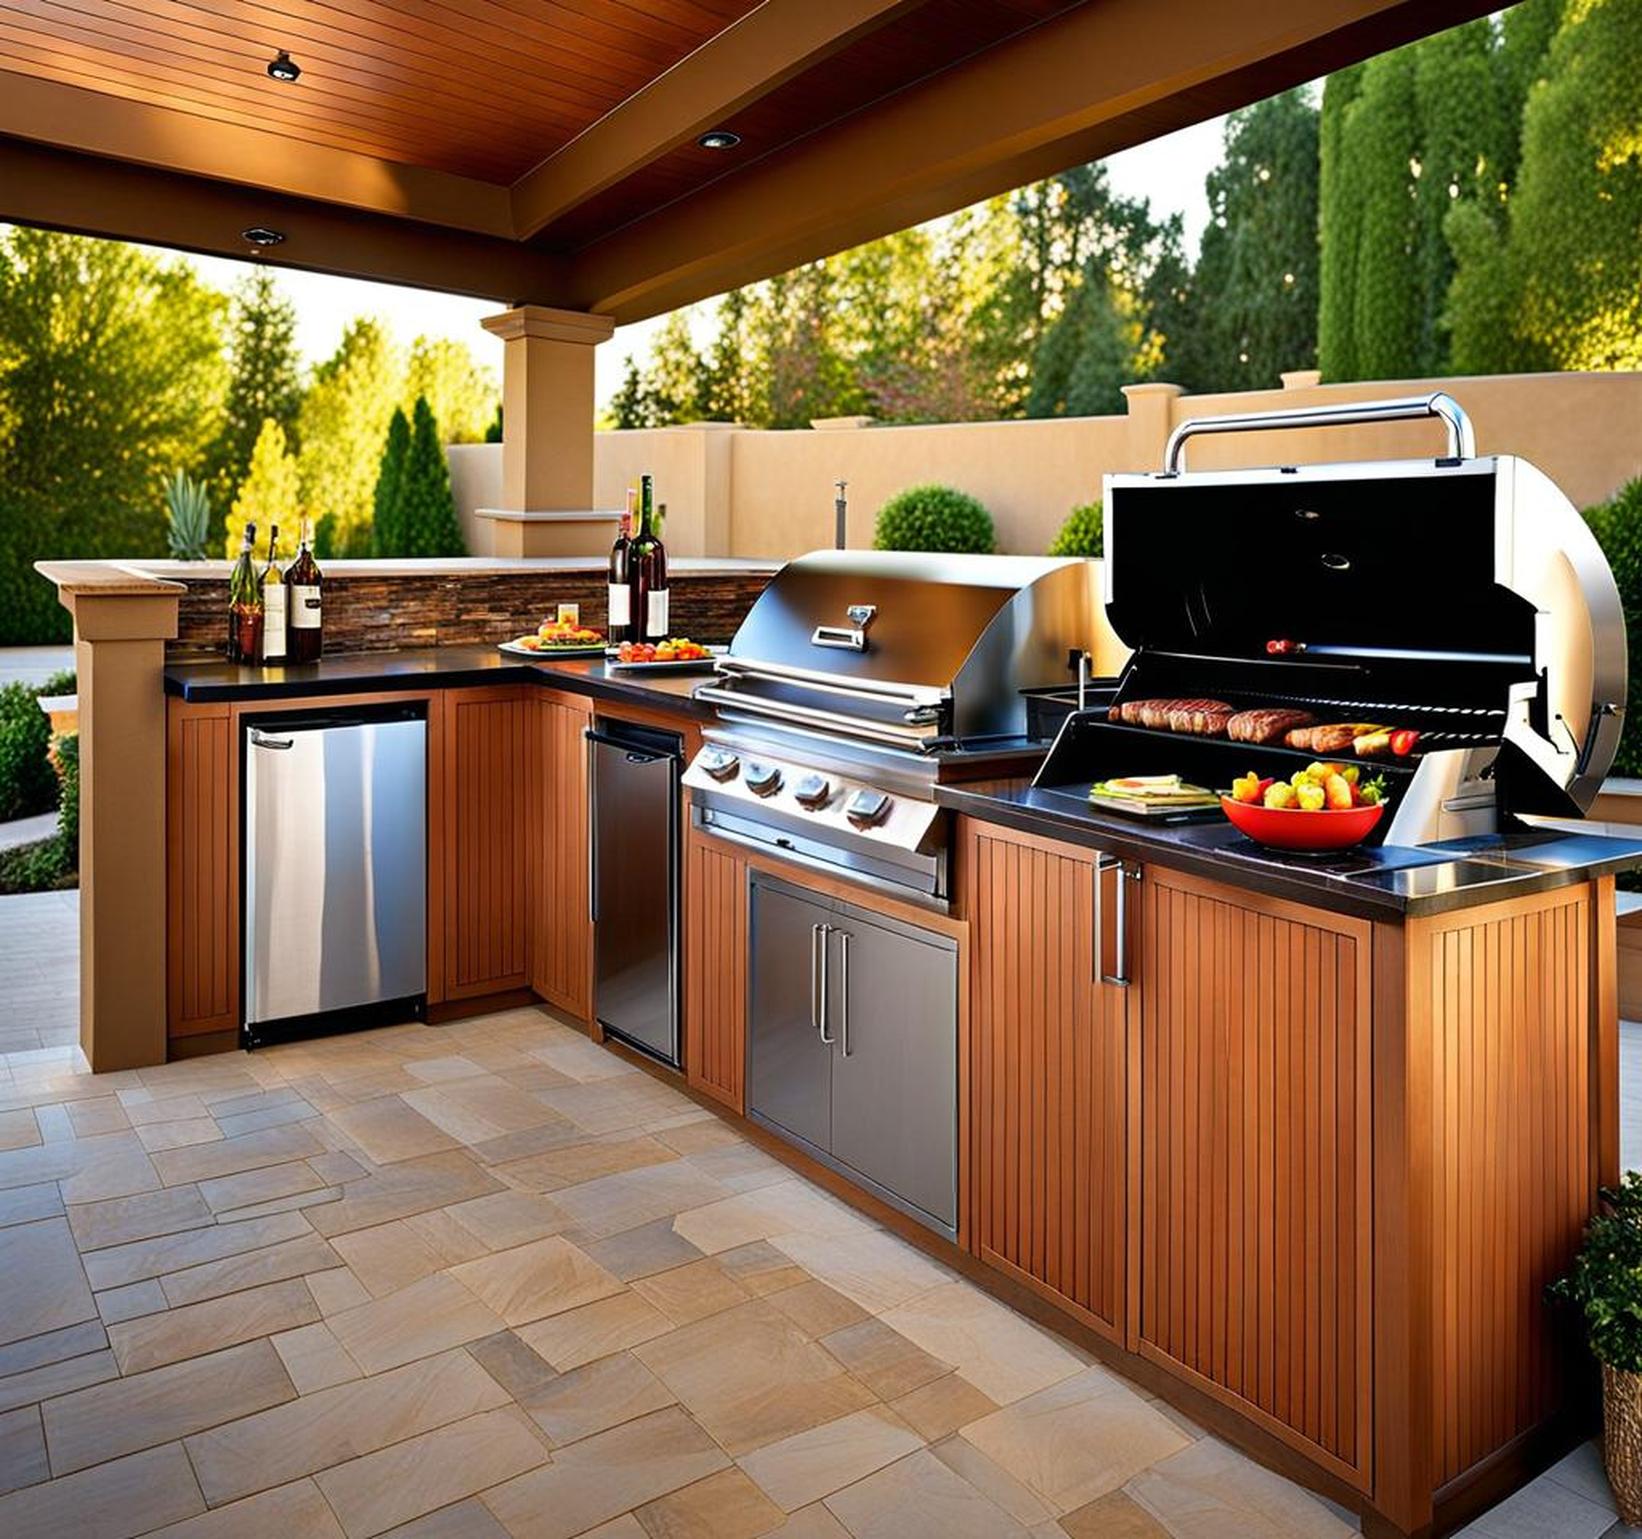 Bring the Indoor Convenience Outdoors With A Built-In BBQ Kitchen